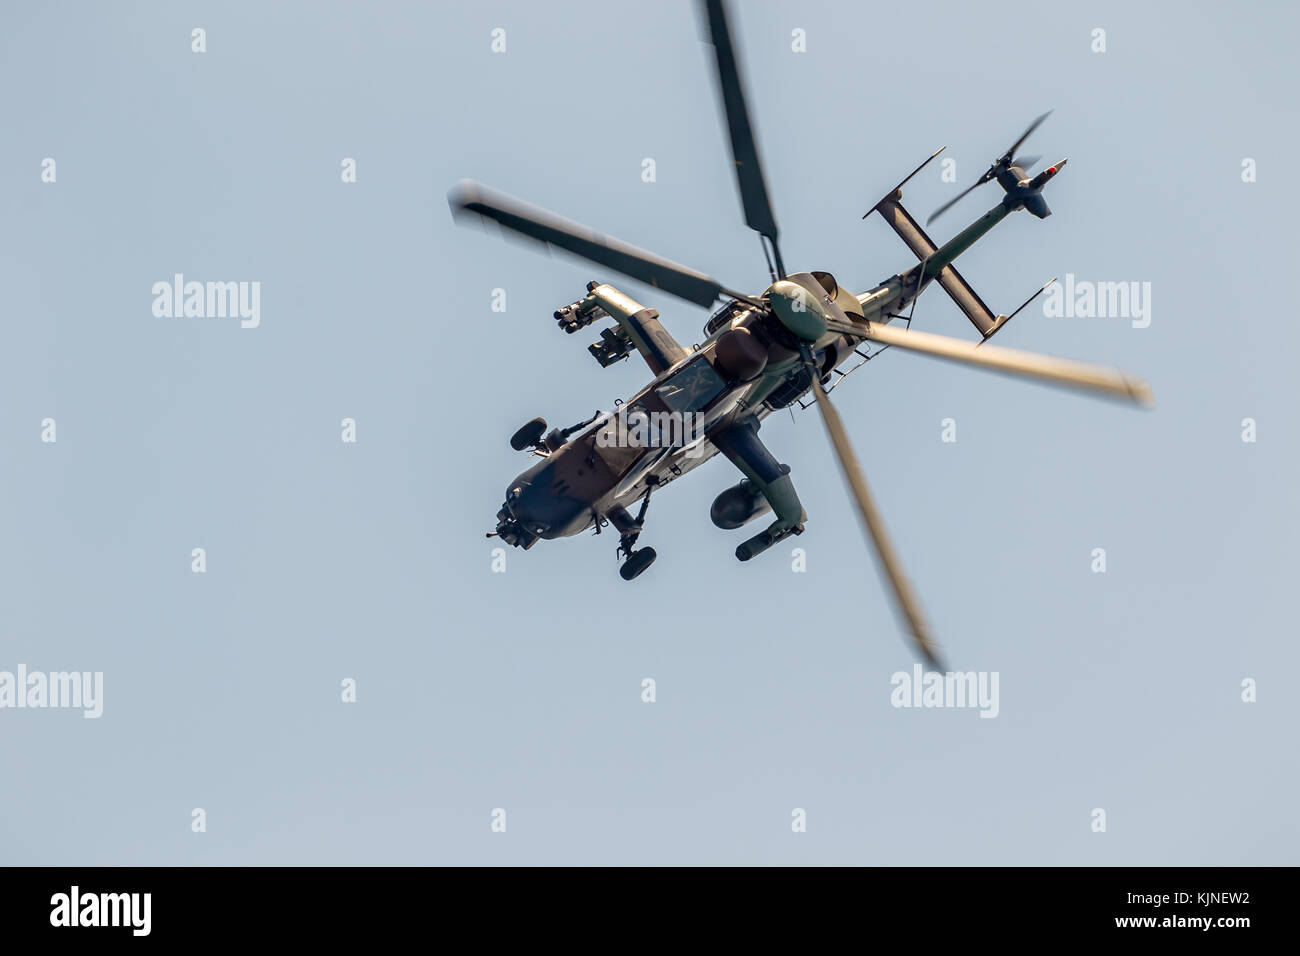 TORRE DEL MAR, MALAGA, SPAIN-JUL 28: Helicopter Eurocopter EC665 Tiger taking part in a exhibition on the 2nd airshow of Torre del Mar on July 28, 201 Stock Photo